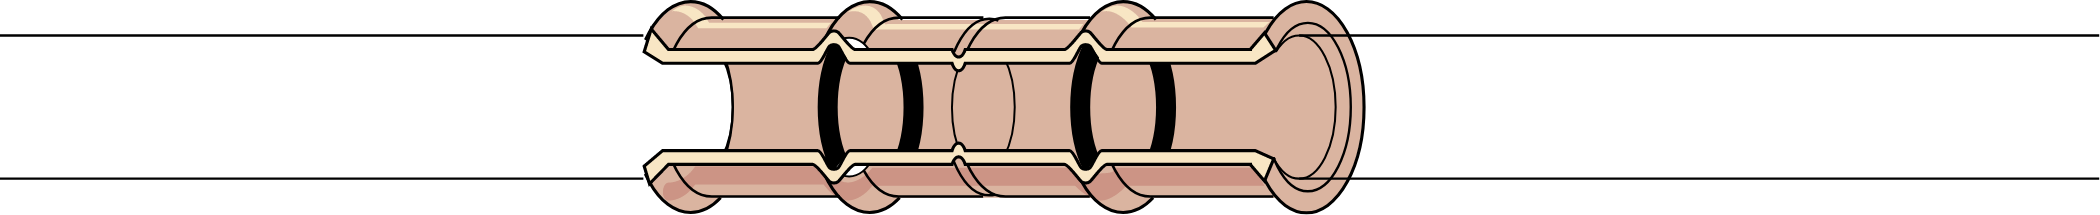 Press Fits line drawing of pipes